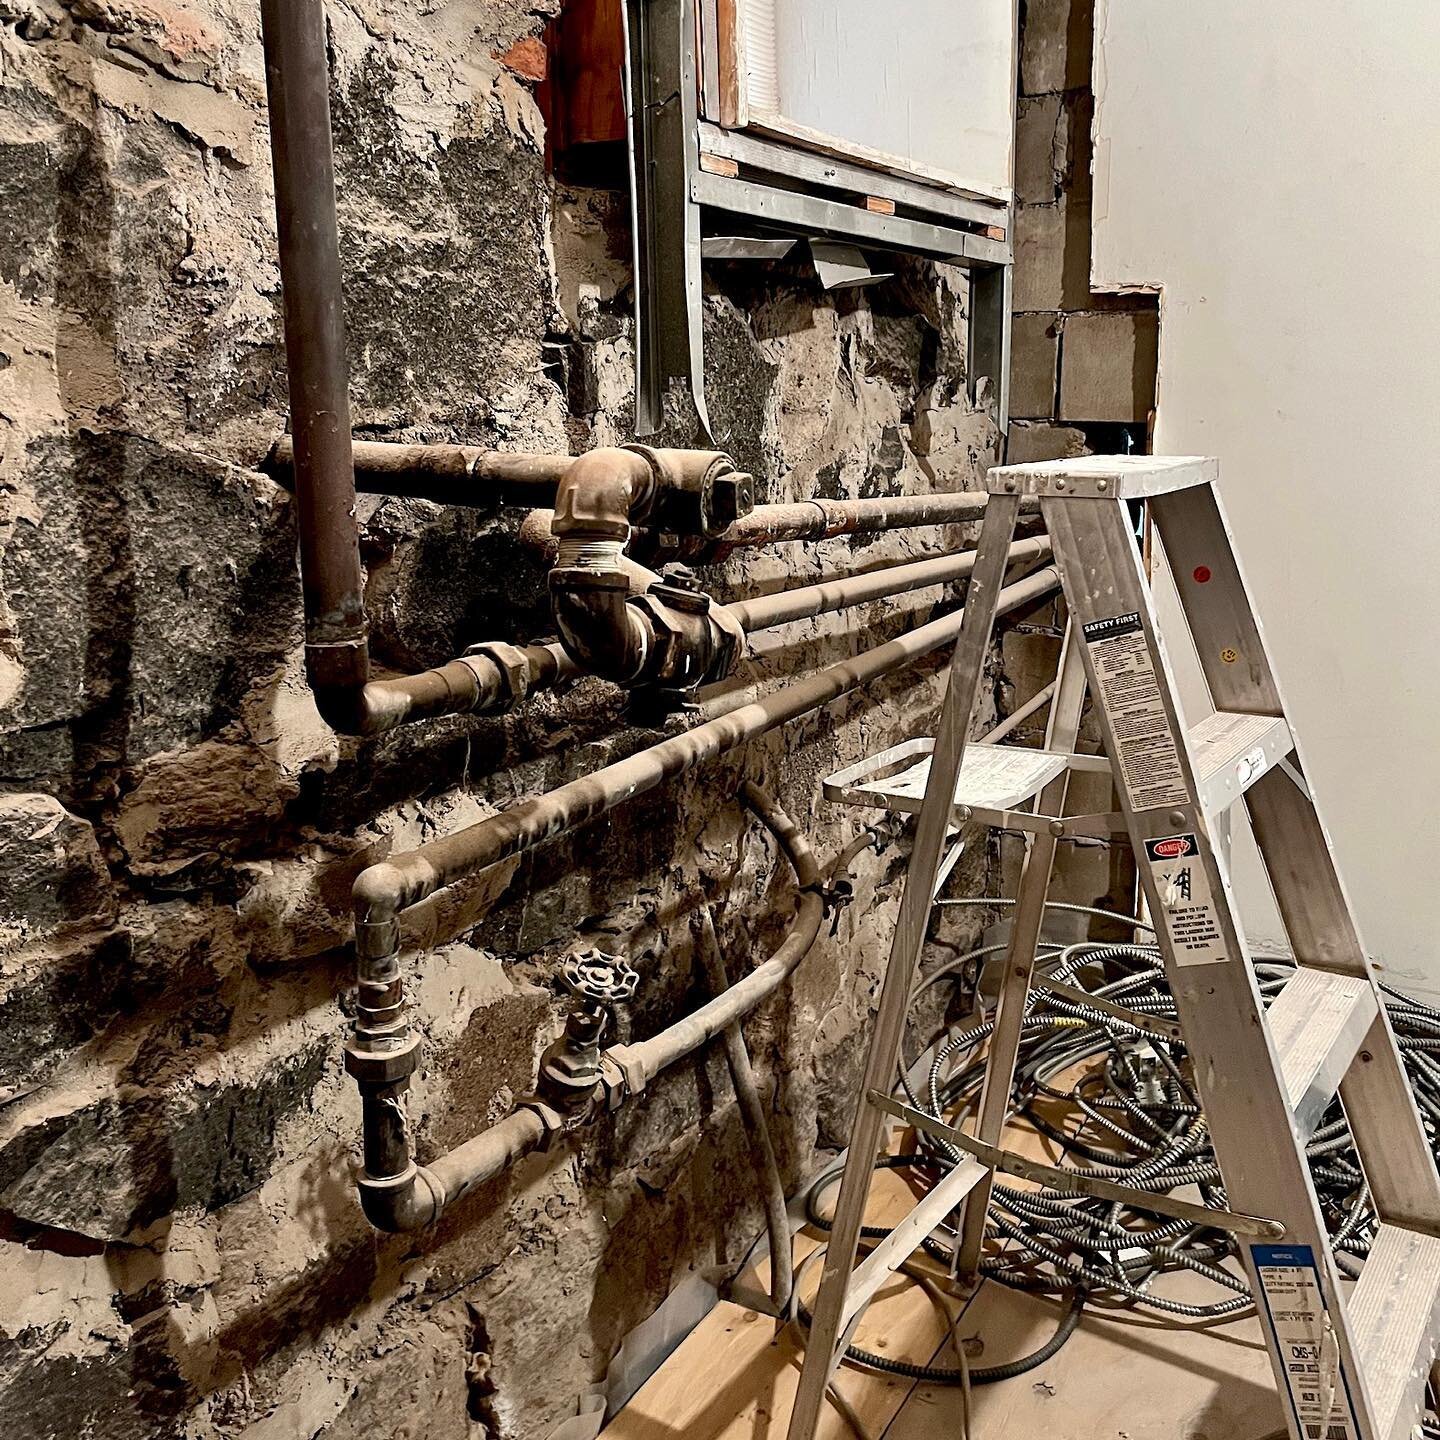 The mystery of the weird wall bump is solved. We learned from the contractor that this knot of piping is not going anywhere without the risk of damaging the incoming water service. So we&rsquo;re stuck with this, but we can design around it. It will 